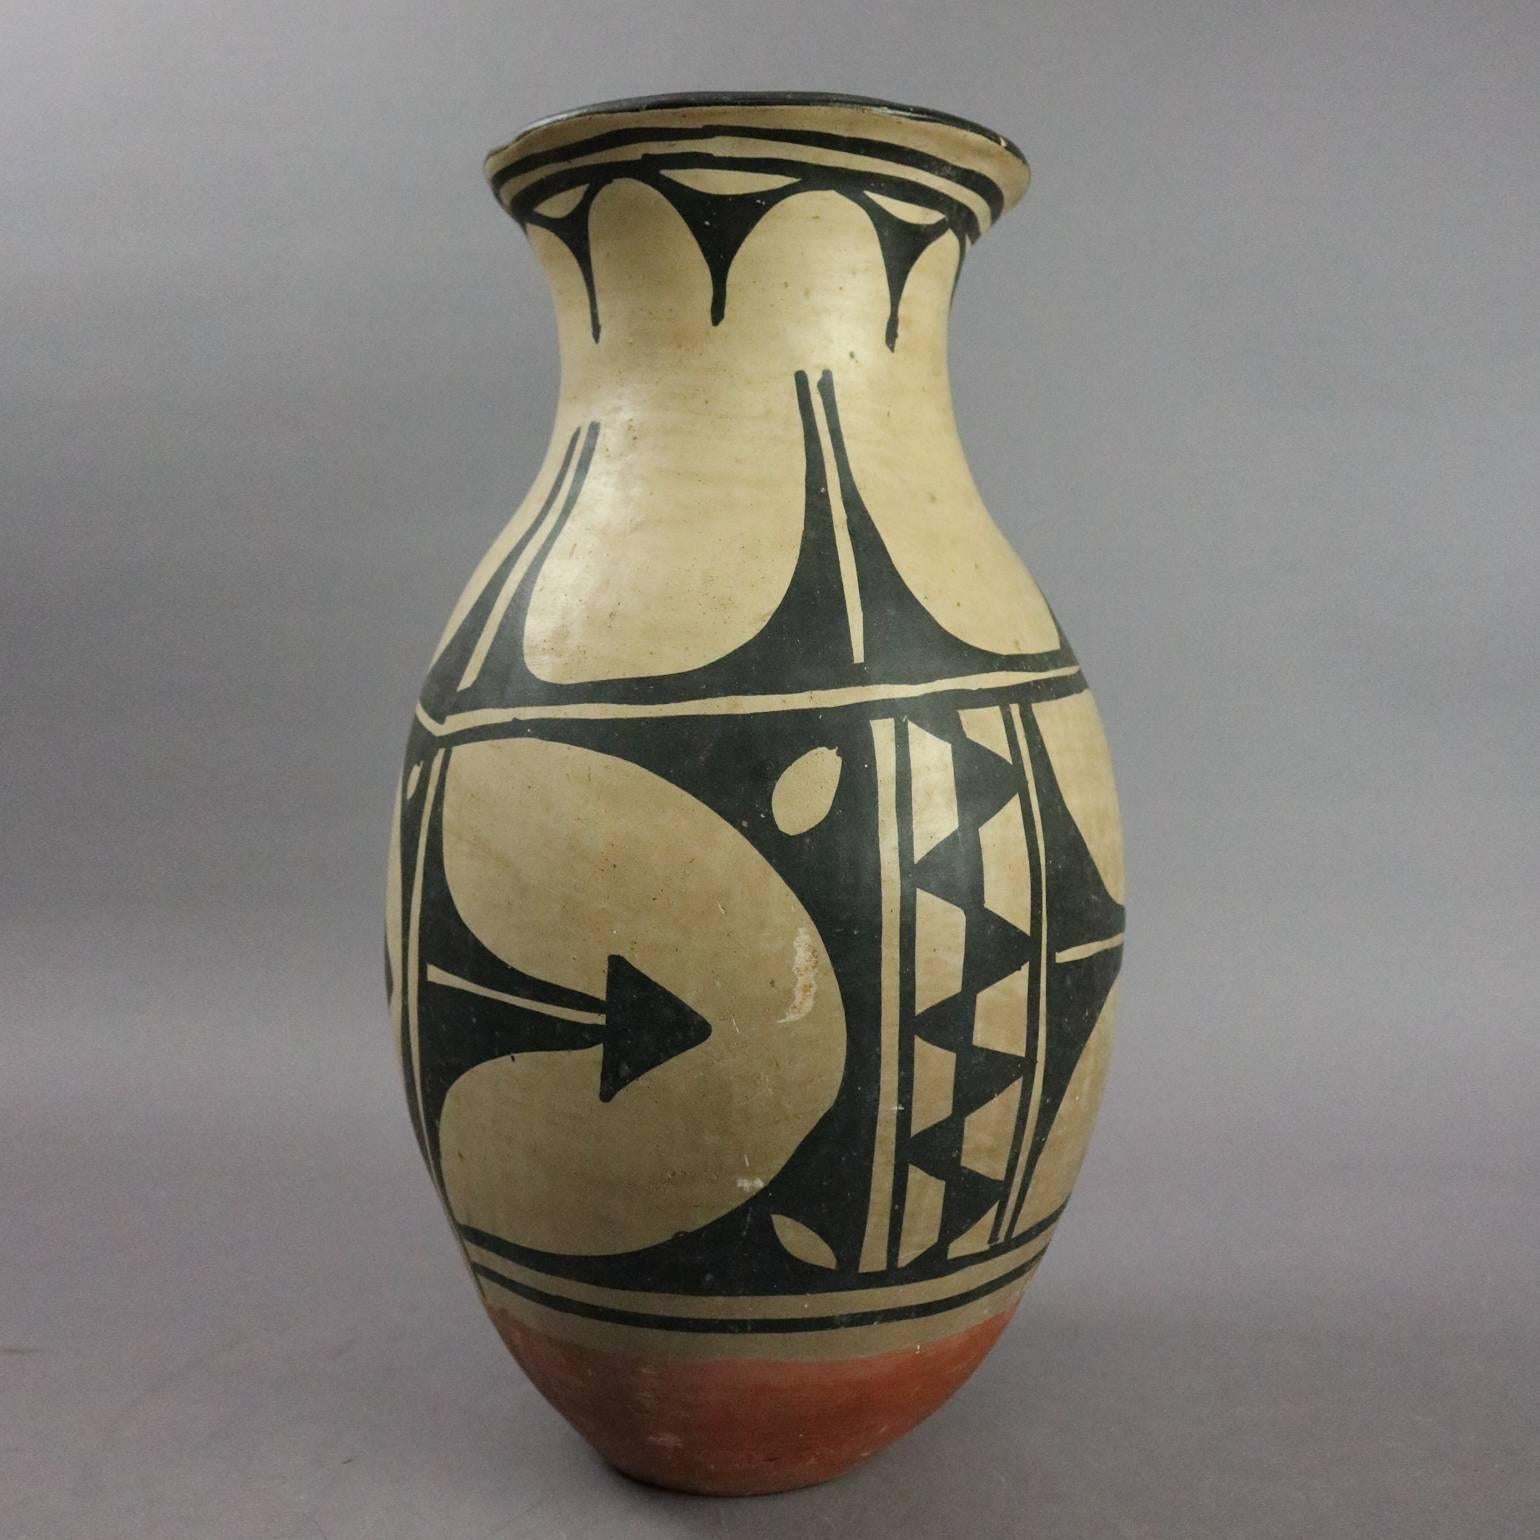 Antique Native American Indian Acoma hand thrown clay jar hand-painted with slip glaze features stylized botanical and geometric elements, circa 1900

Measures: 13.5